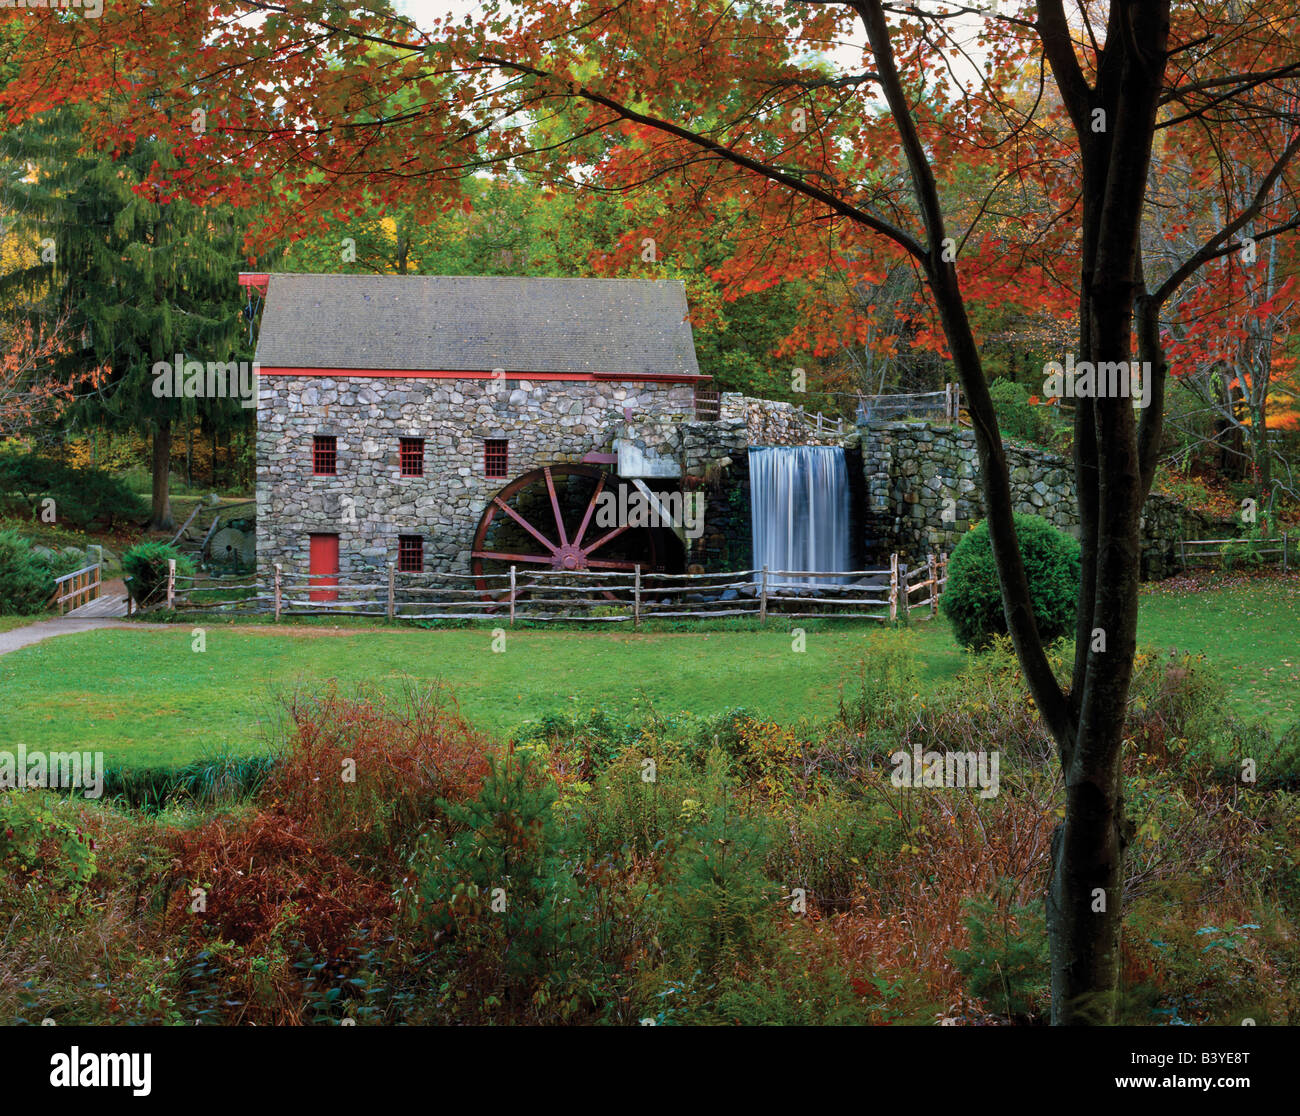 USA, Massachusetts, Sudbury. View of Grist Mill built by Henry Ford. Stock Photo